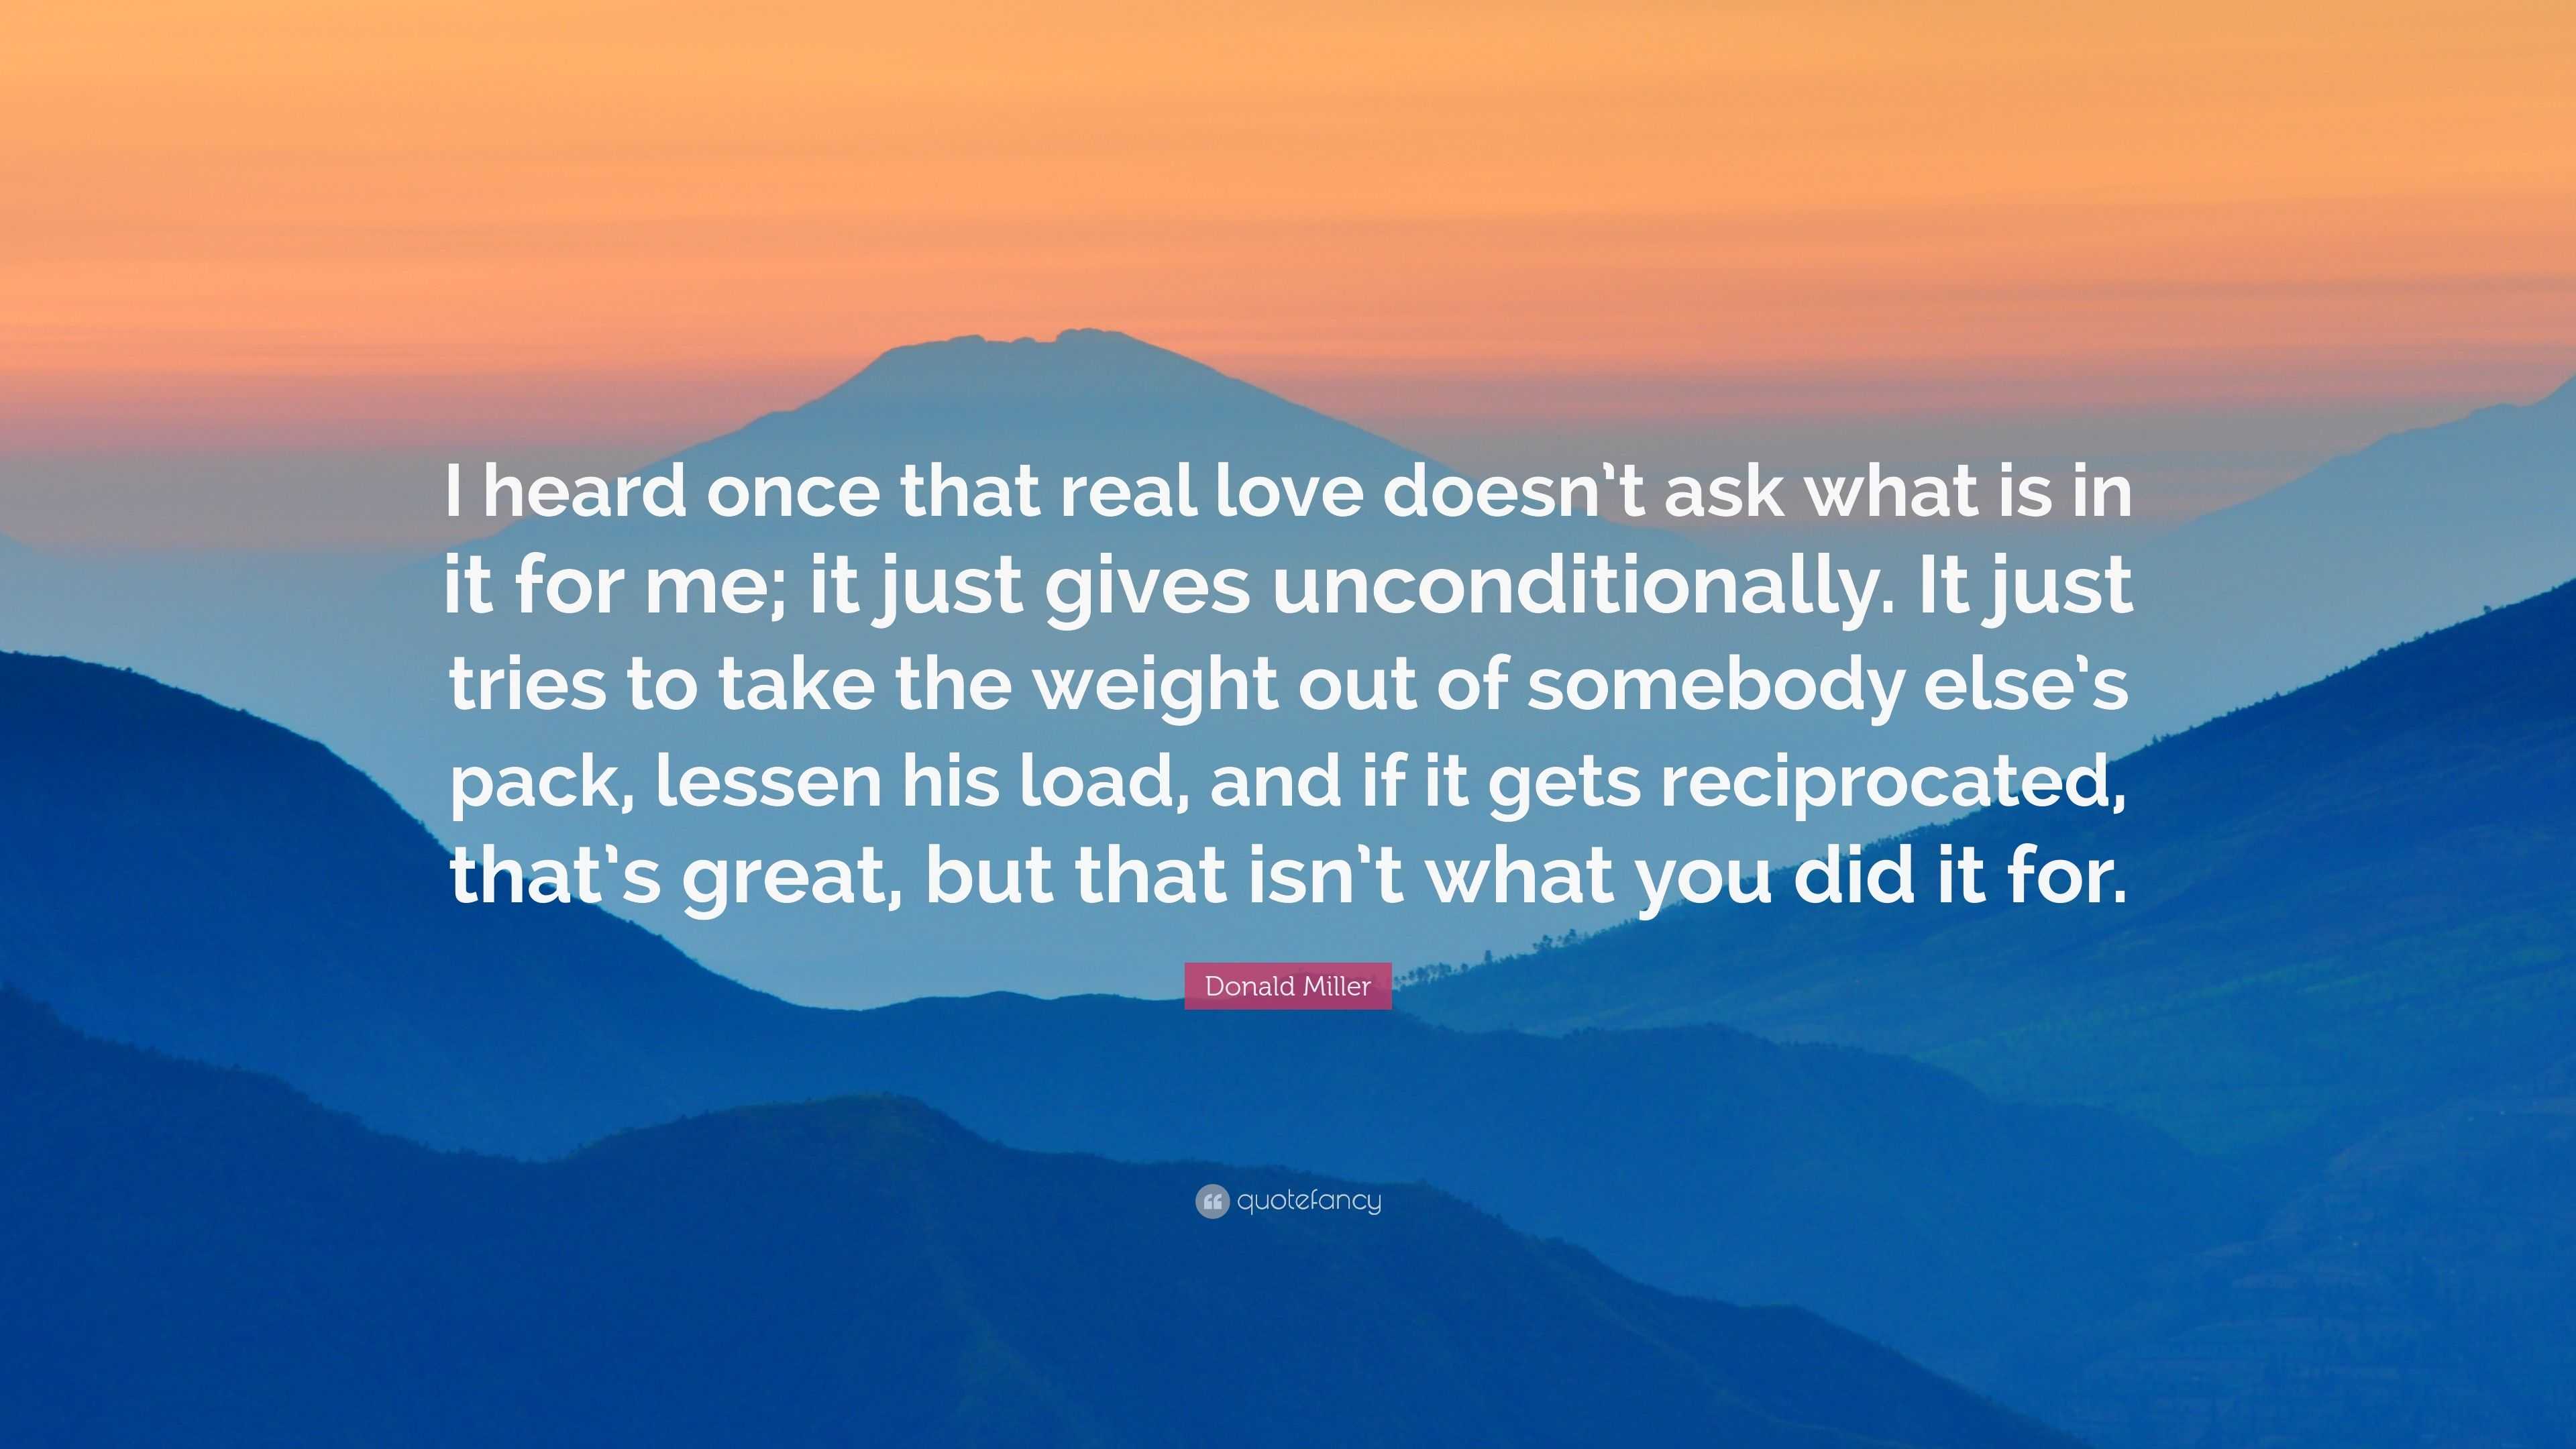 Donald Miller Quote: “I heard once that real love doesn’t ask what is ...